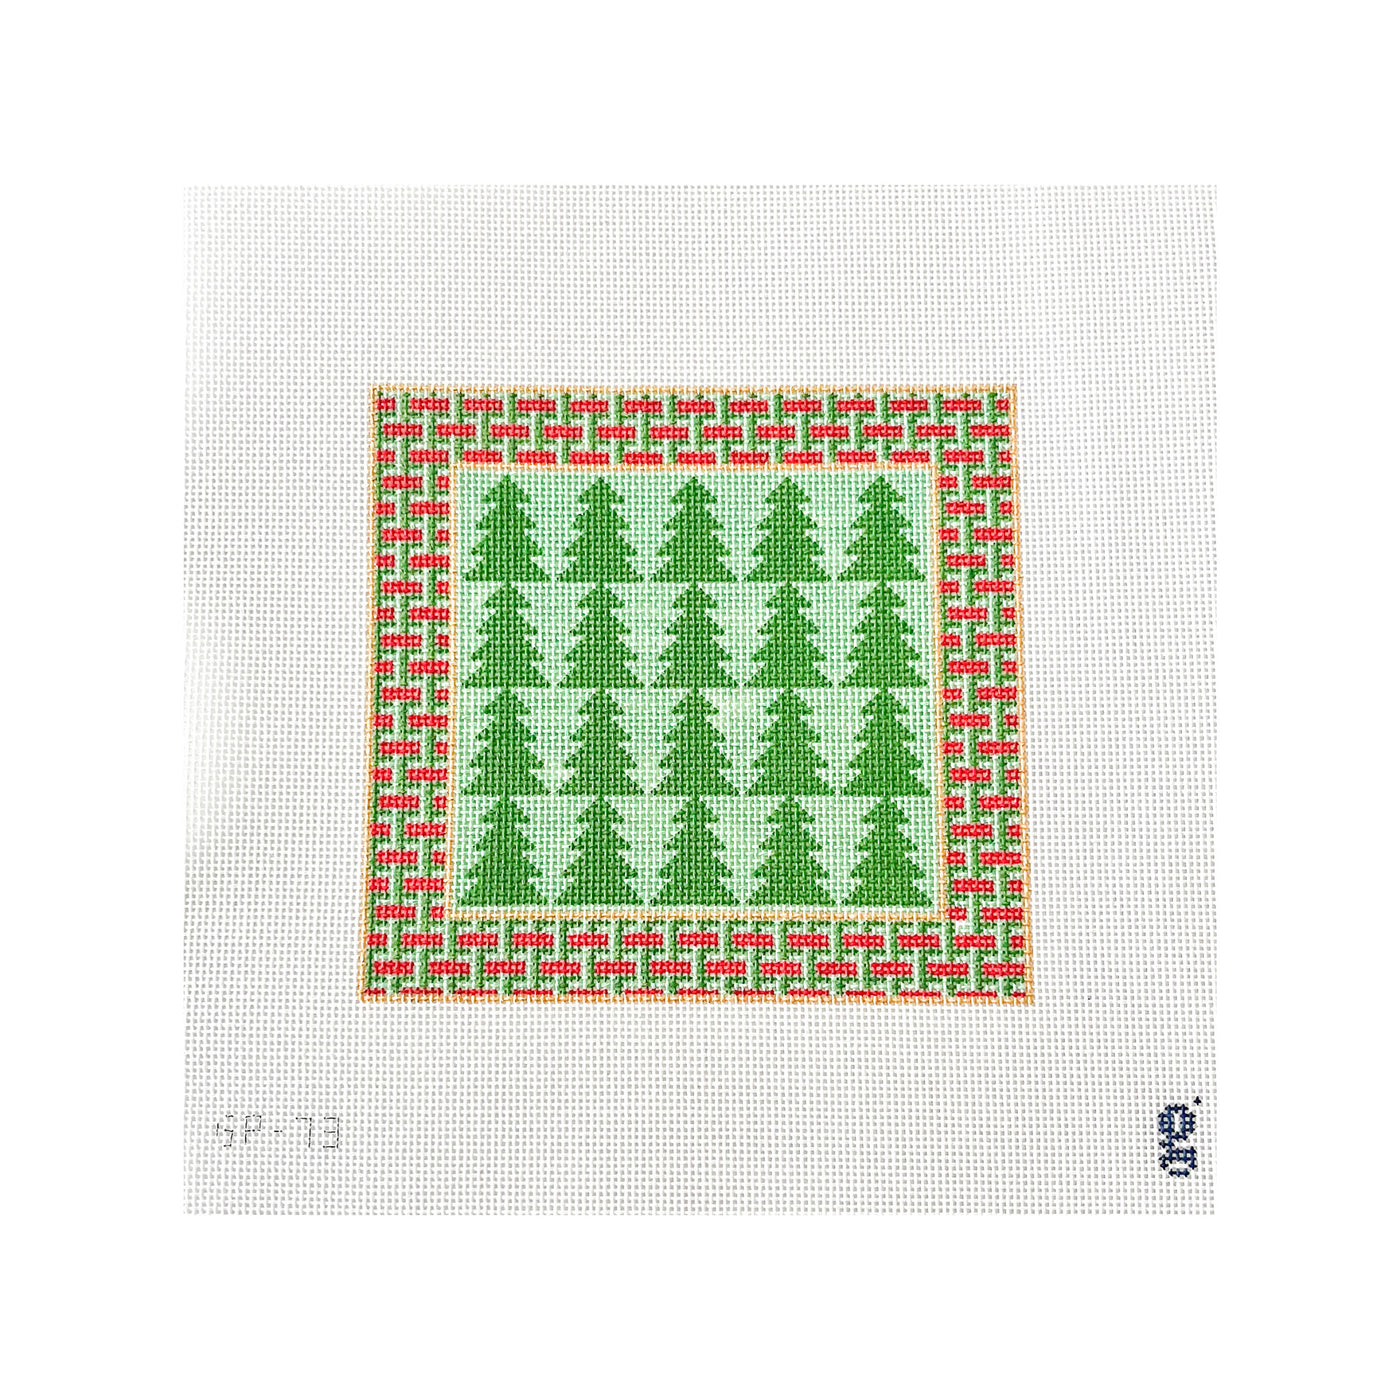 White needlepoint canvas featuring a square painted design. The outer border is green, mint green, red and gold in a woven pattern and the inside is mint green and green alternating Christmas trees.